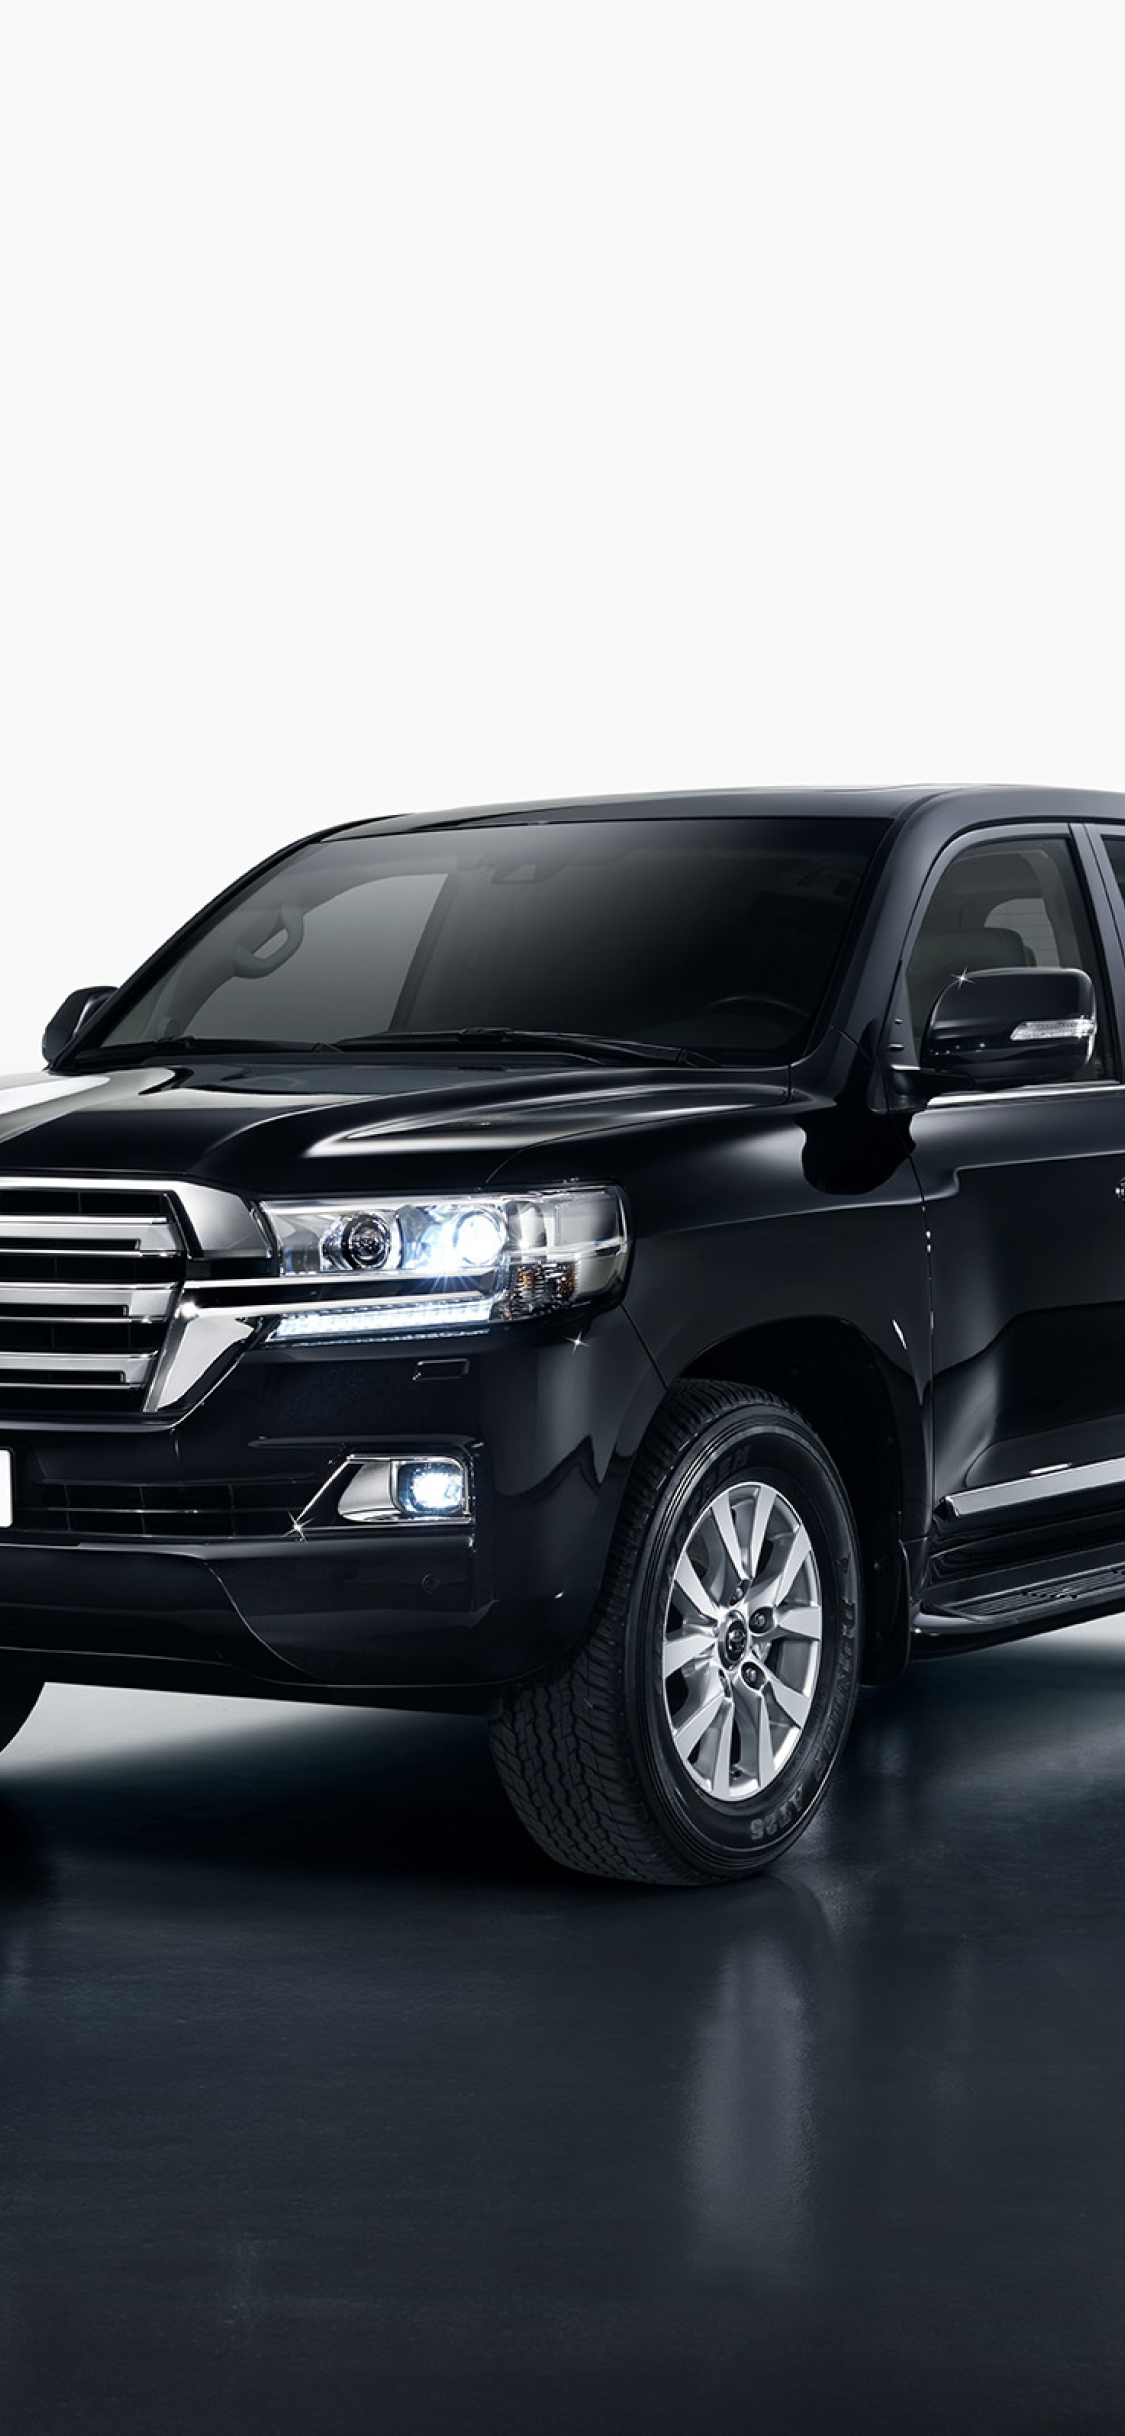 Download 1125x2436 toyota, land cruiser, side view Iphone XS,Iphone ...